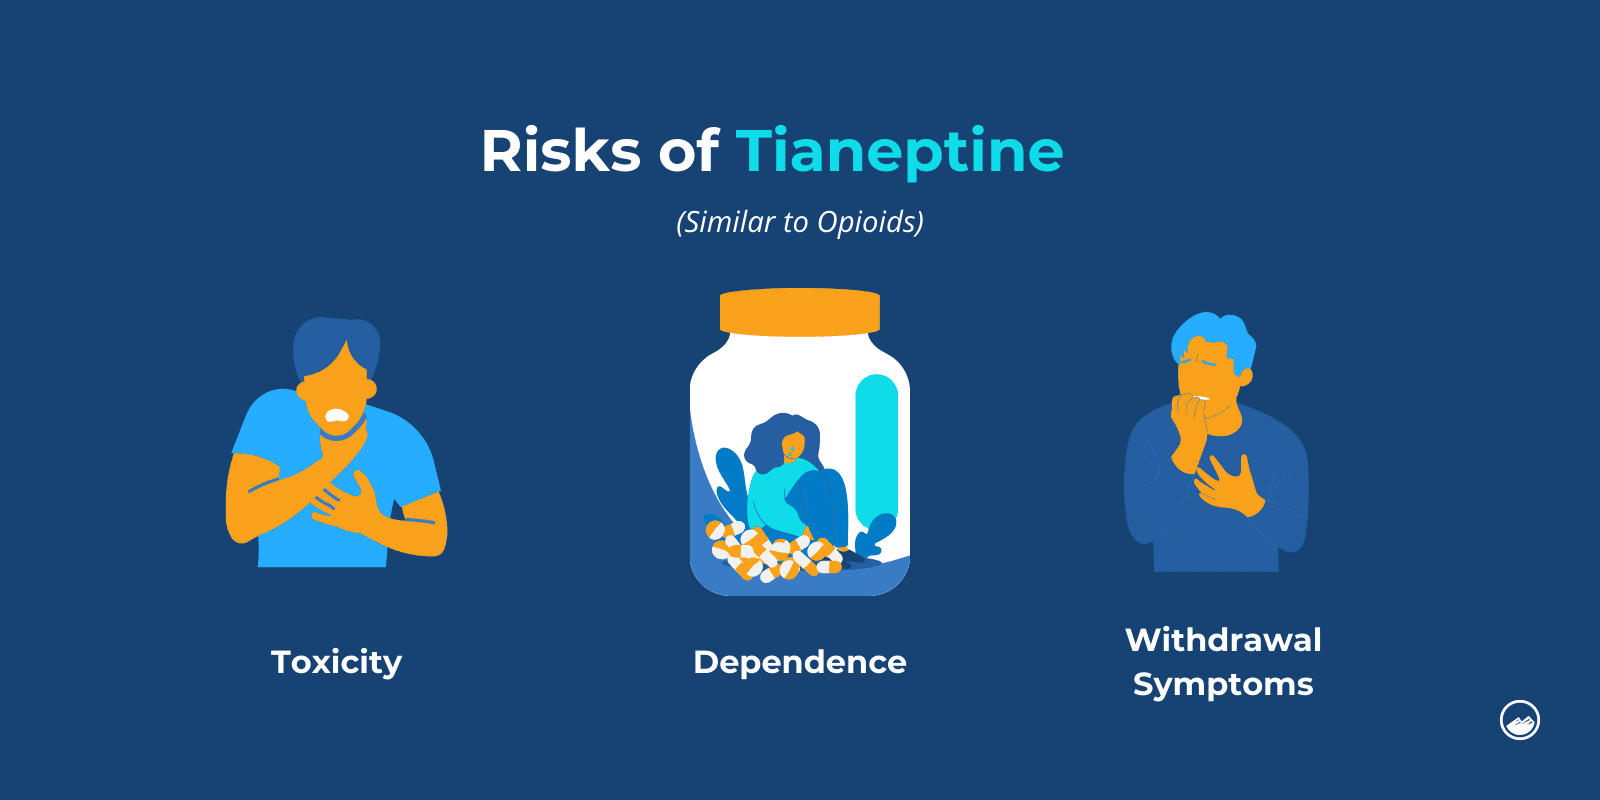 Risks of Tianeptine infographic